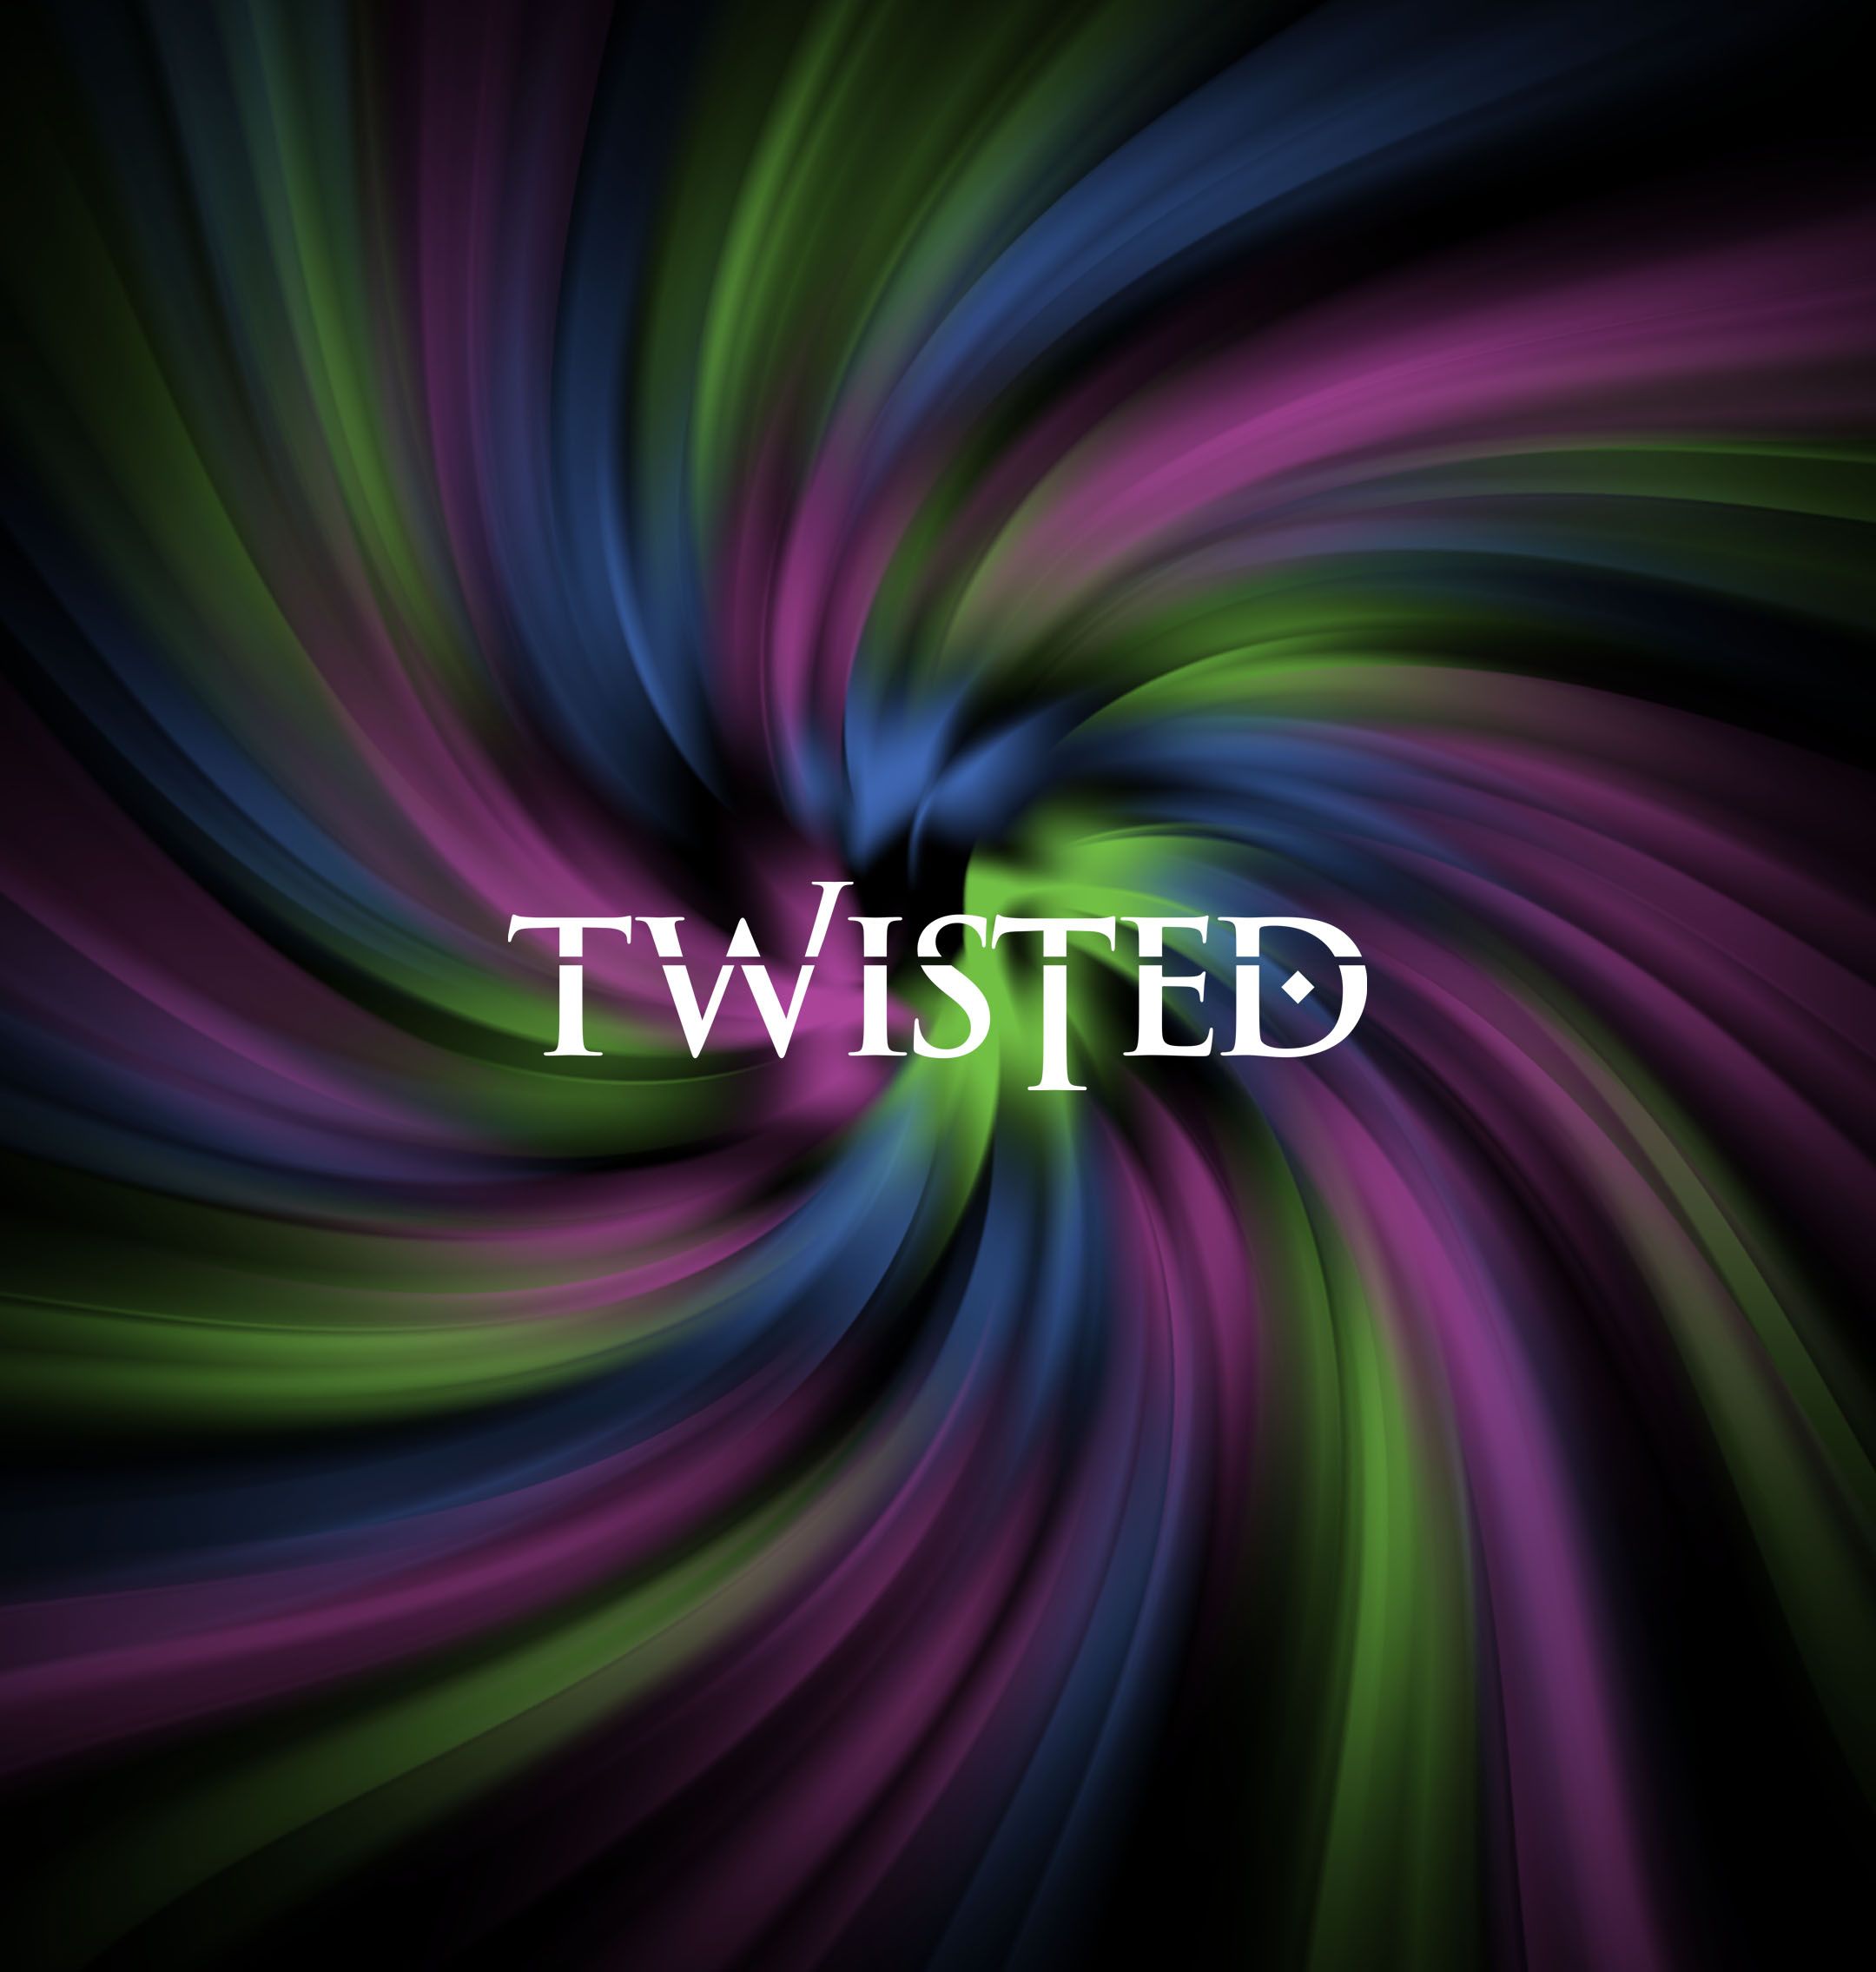 Twisted Phone Wallpaper